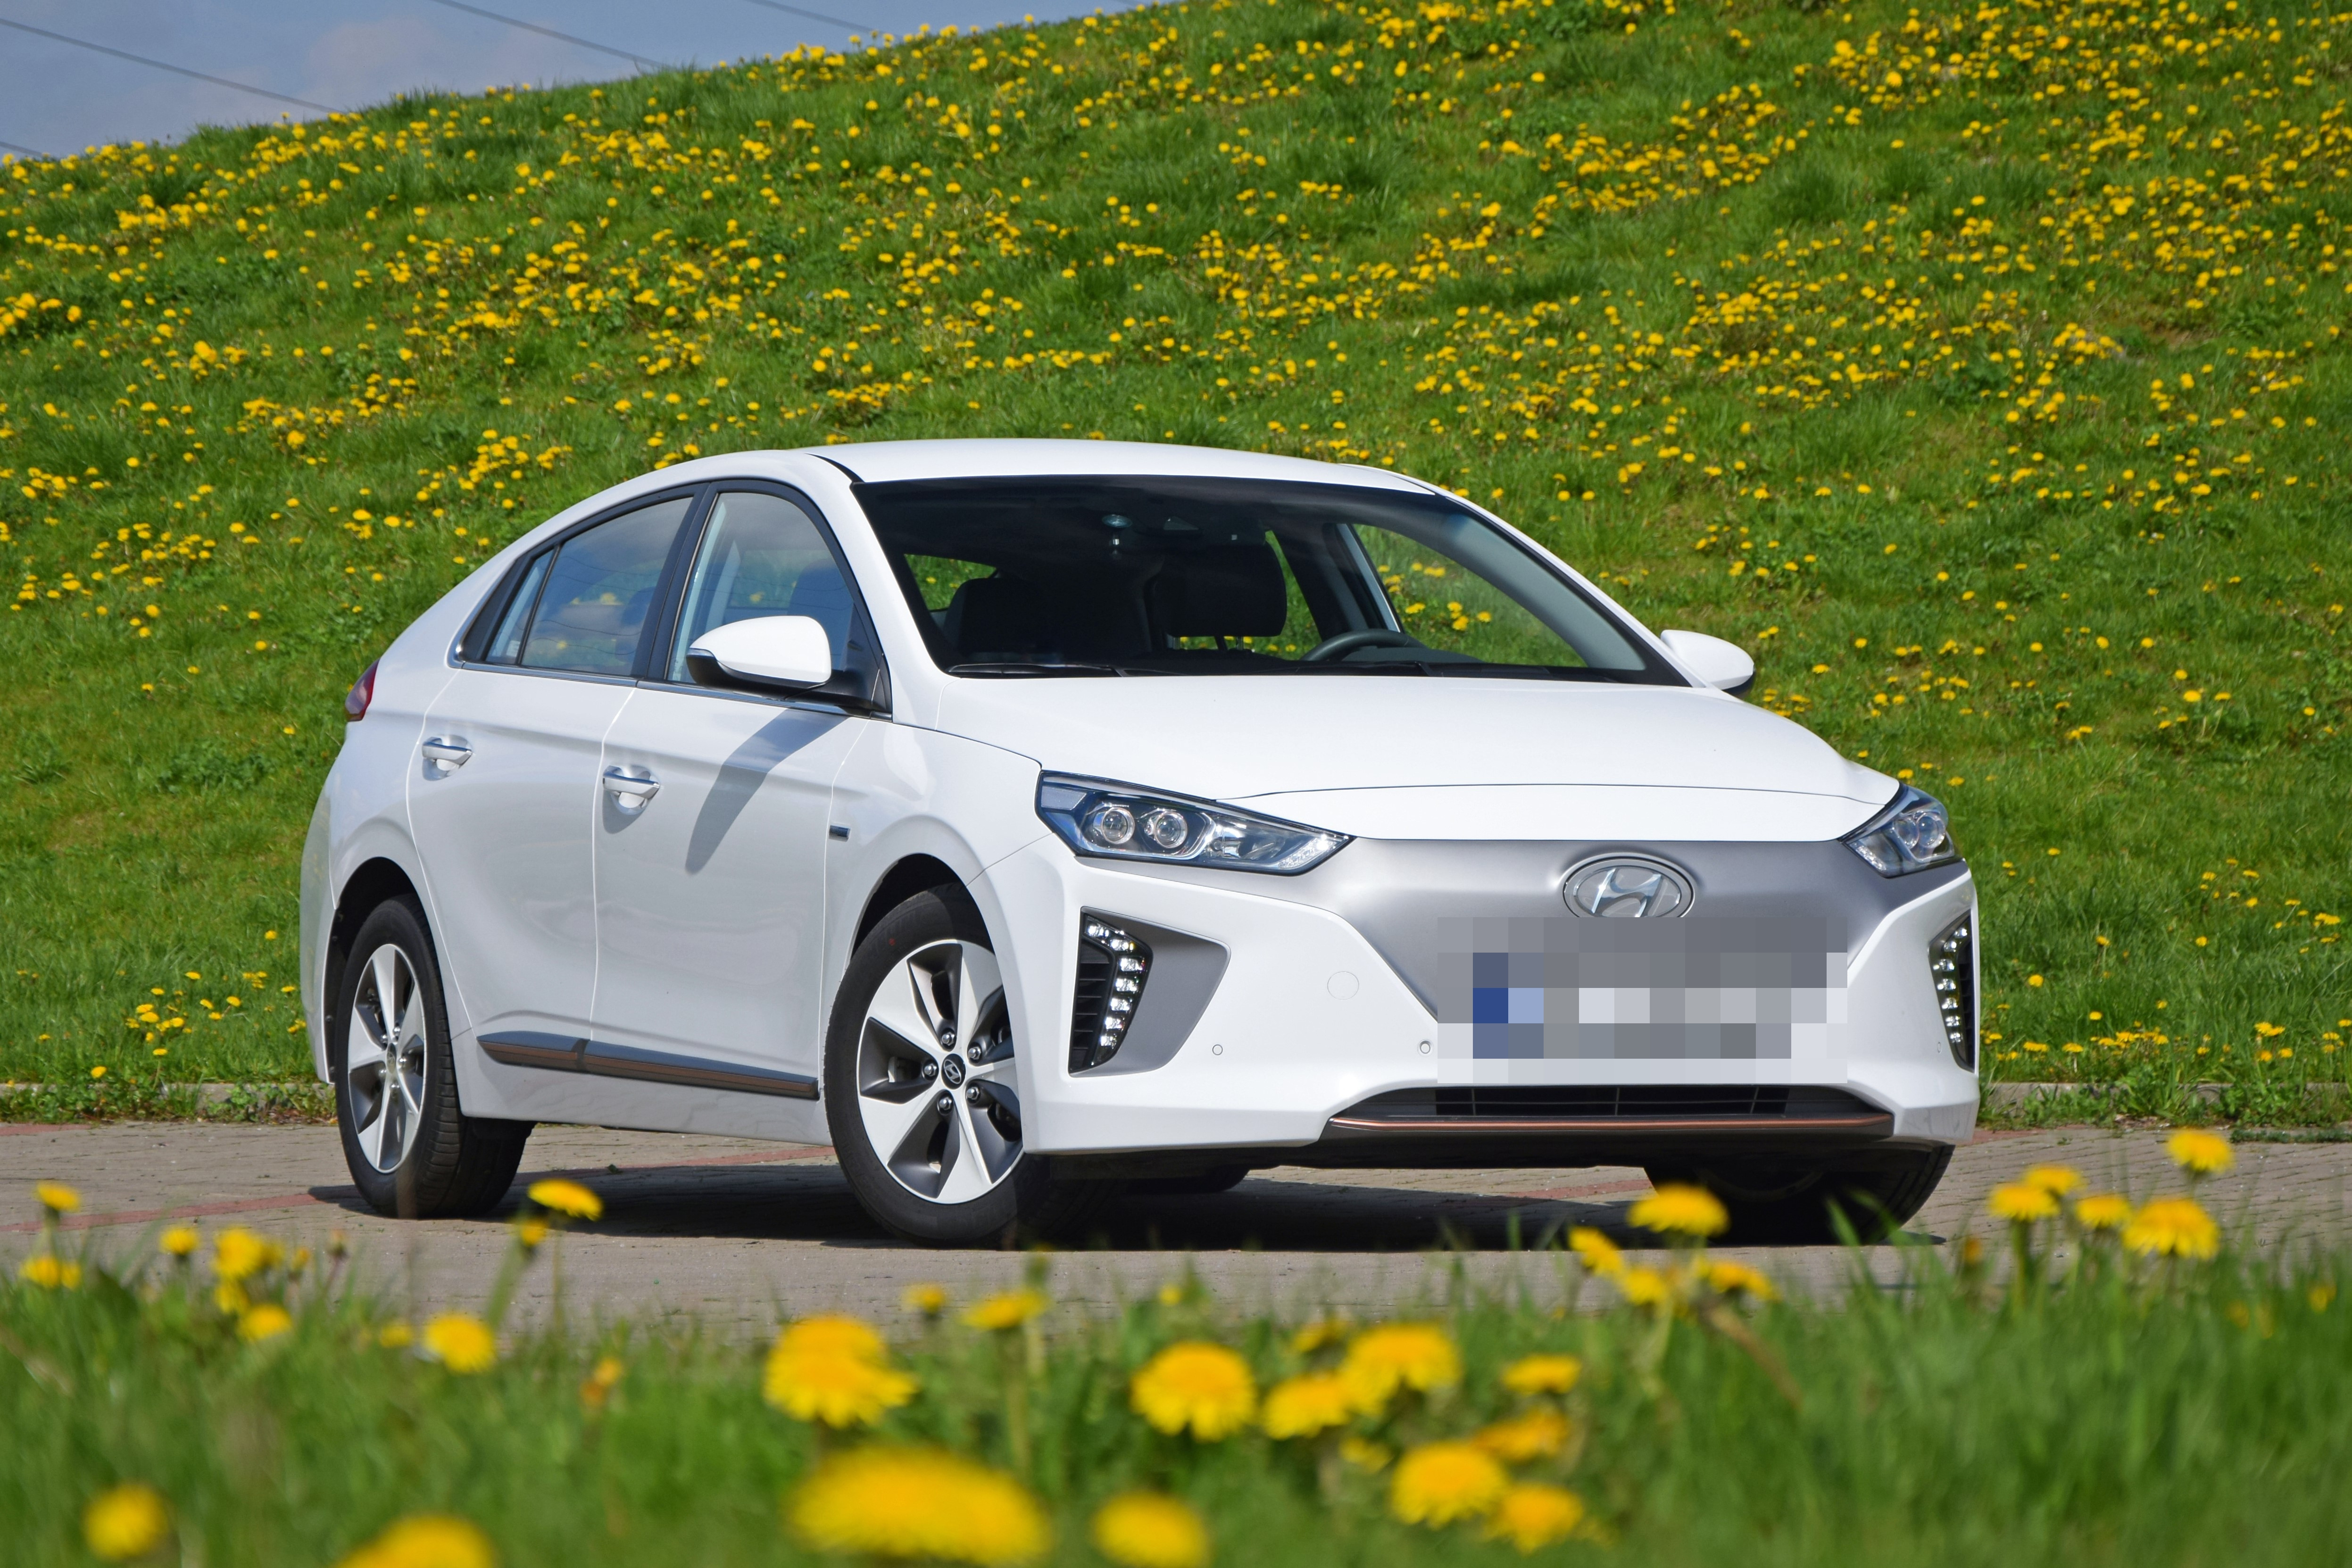 Hyundai Ioniq Electric got the thumbs up in our review